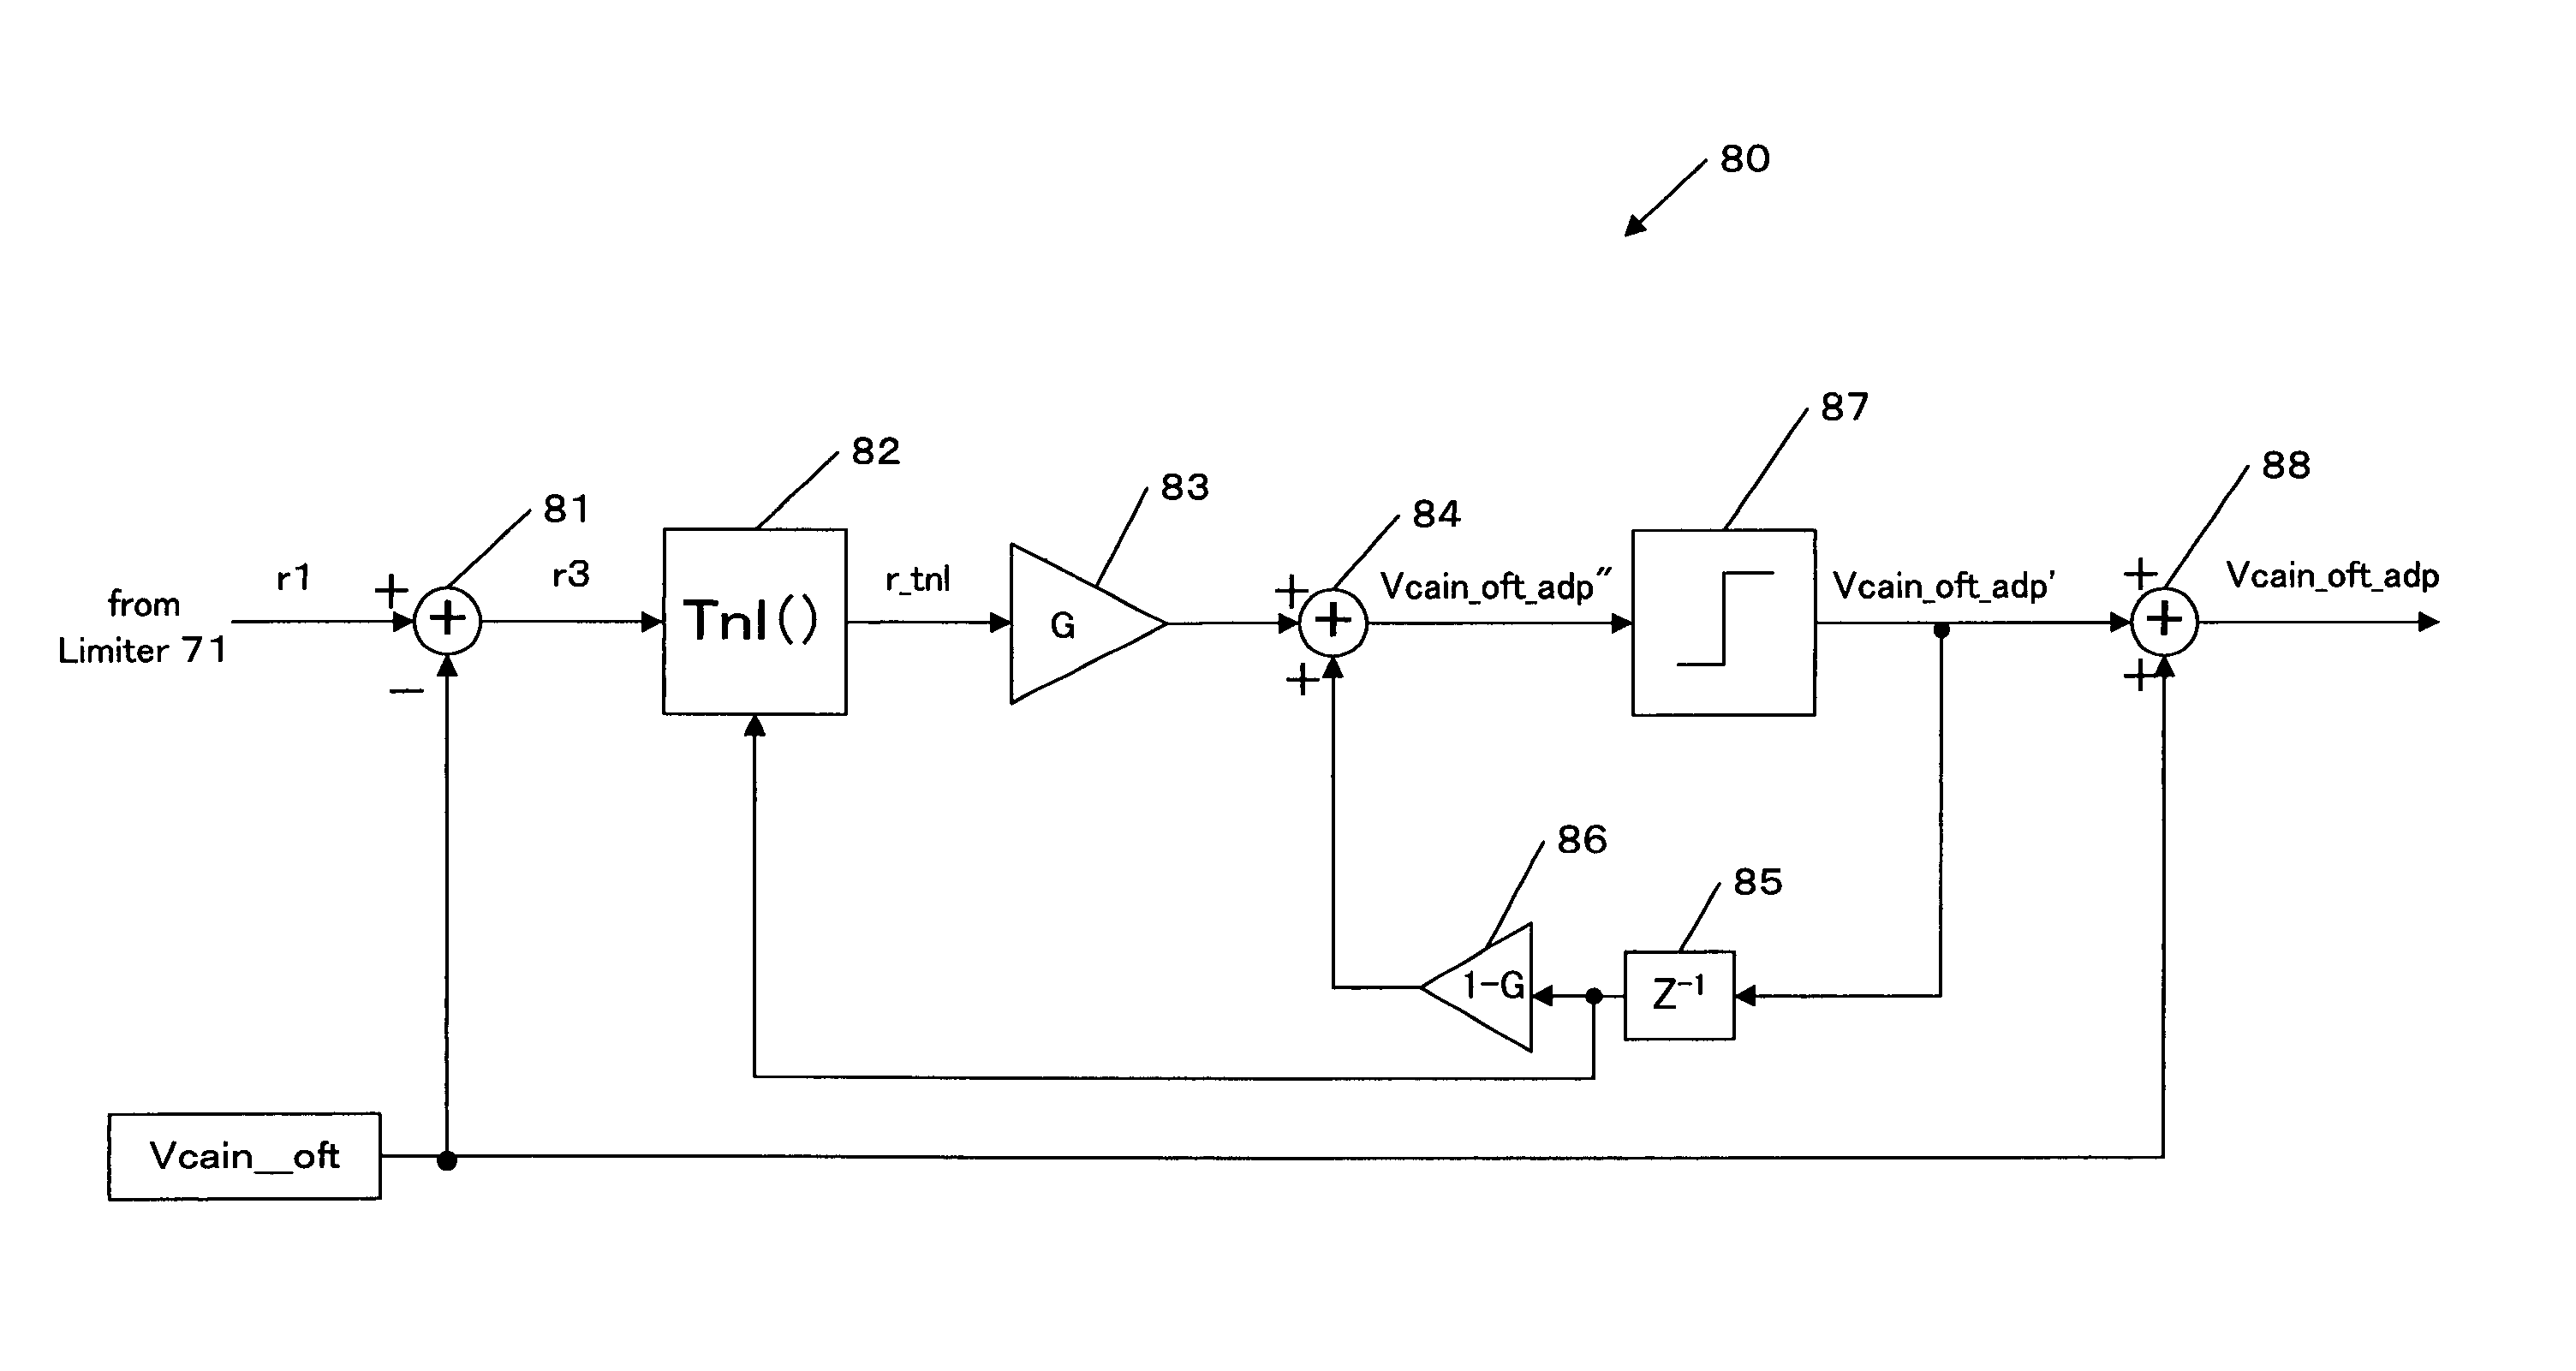 Control apparatus for controlling a plant by using a delta-sigma modulation algorithm